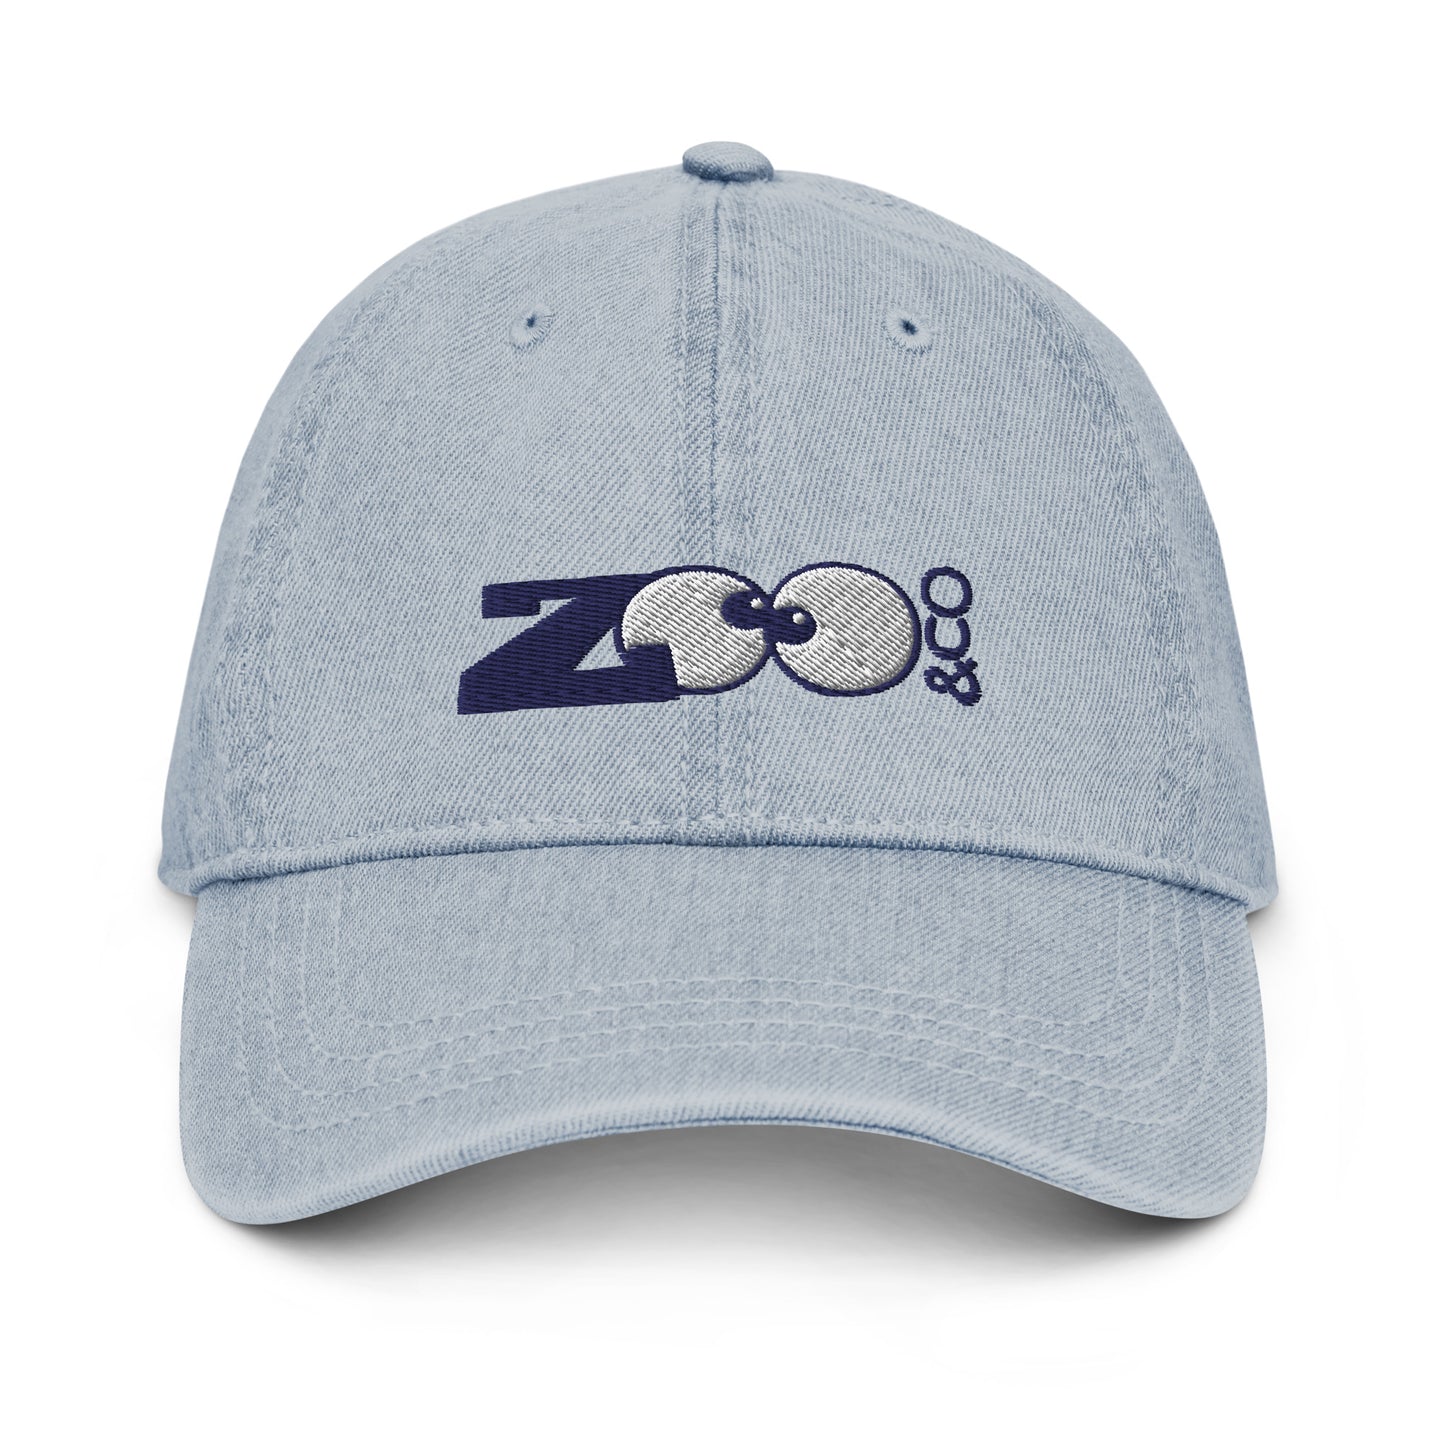 Zoo&co branded Denim Hat. Light blue. Front view